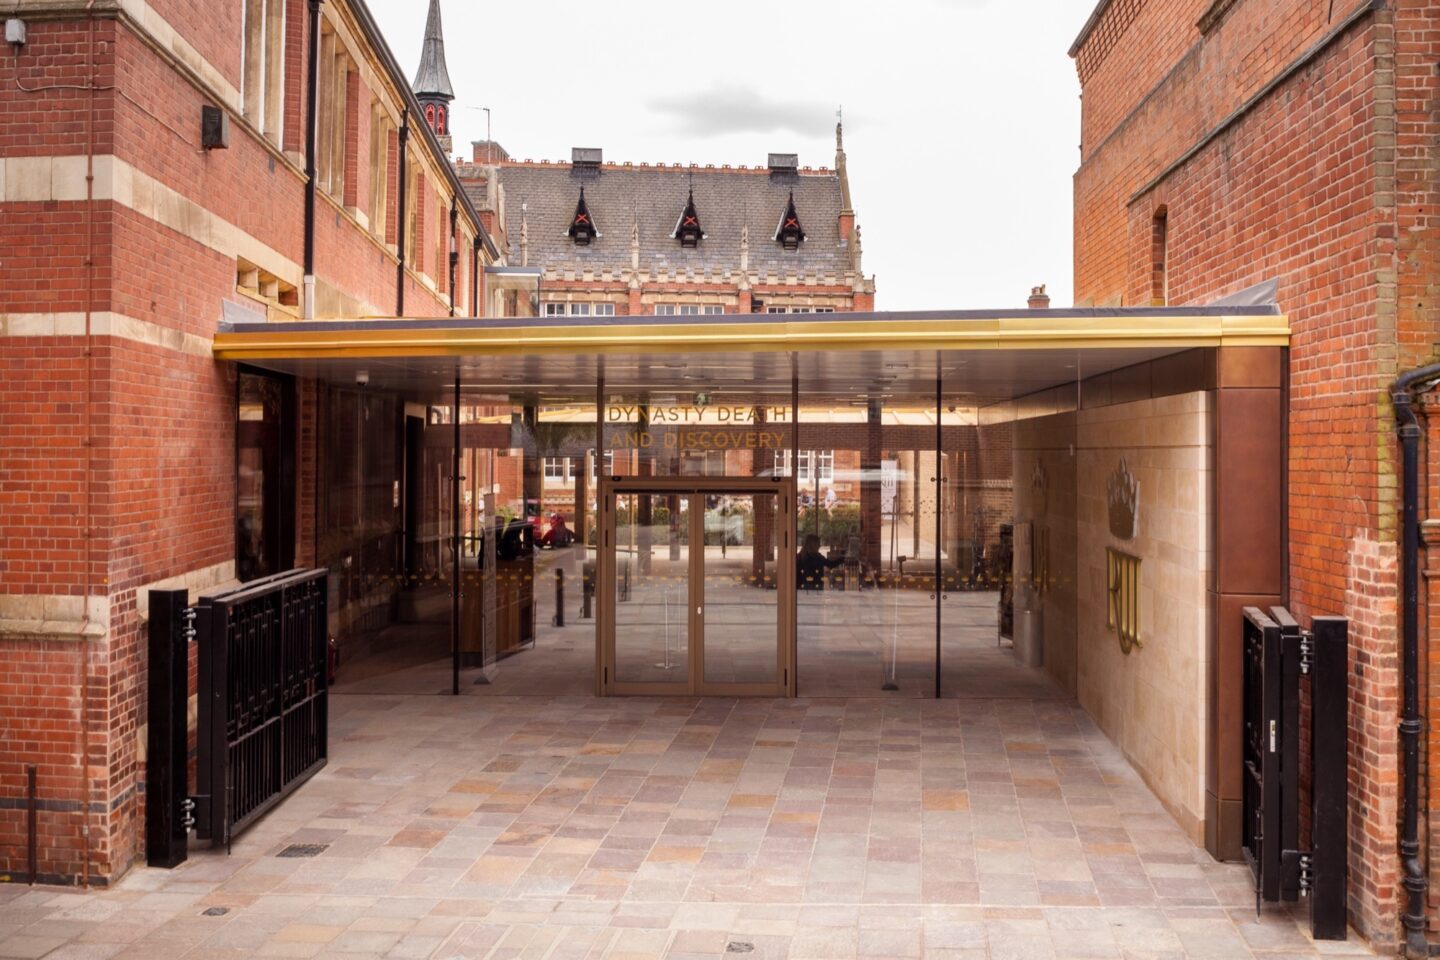 King Richard III Visitor Centre, Leicester